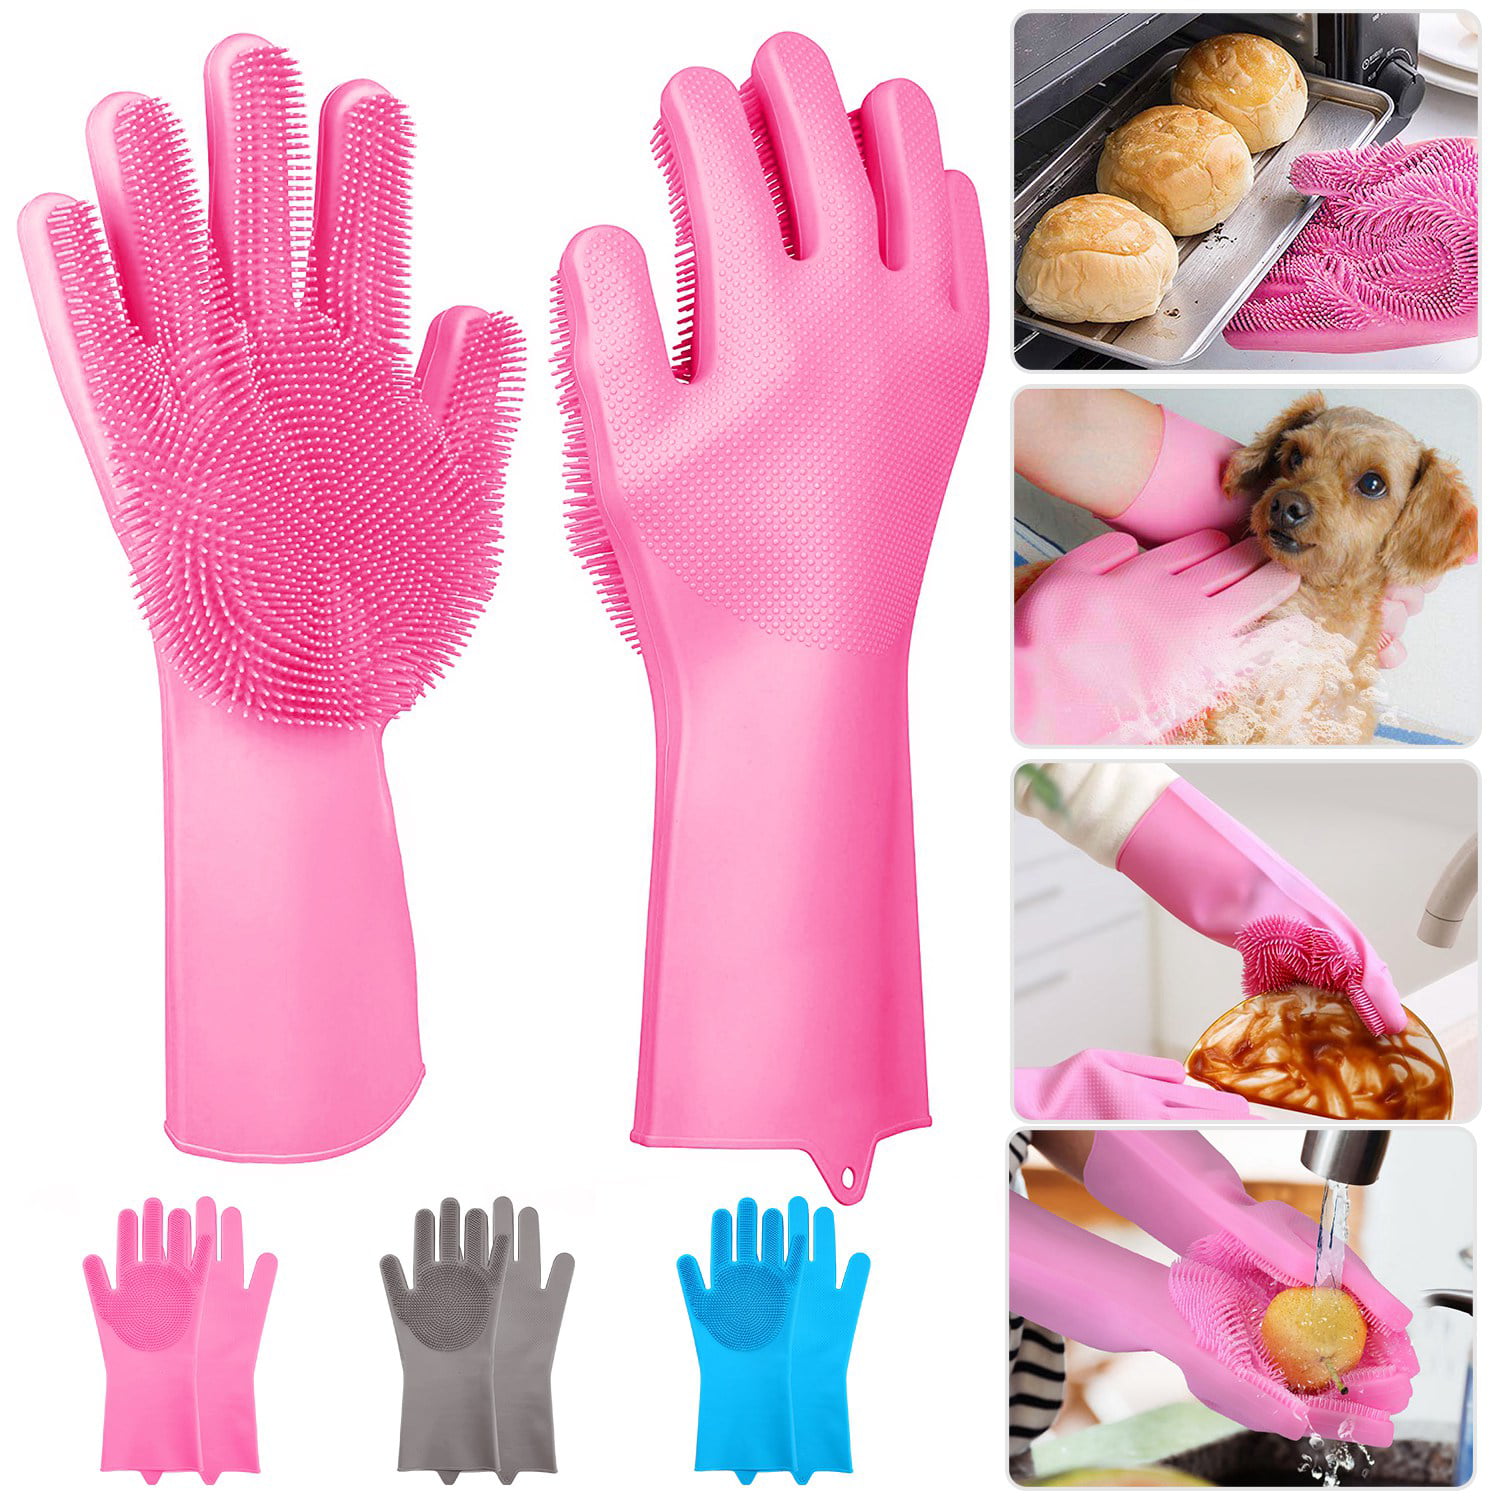 Buy The Best Silicone Dish Cleaning Gloves At Nuseas – NuSEAS